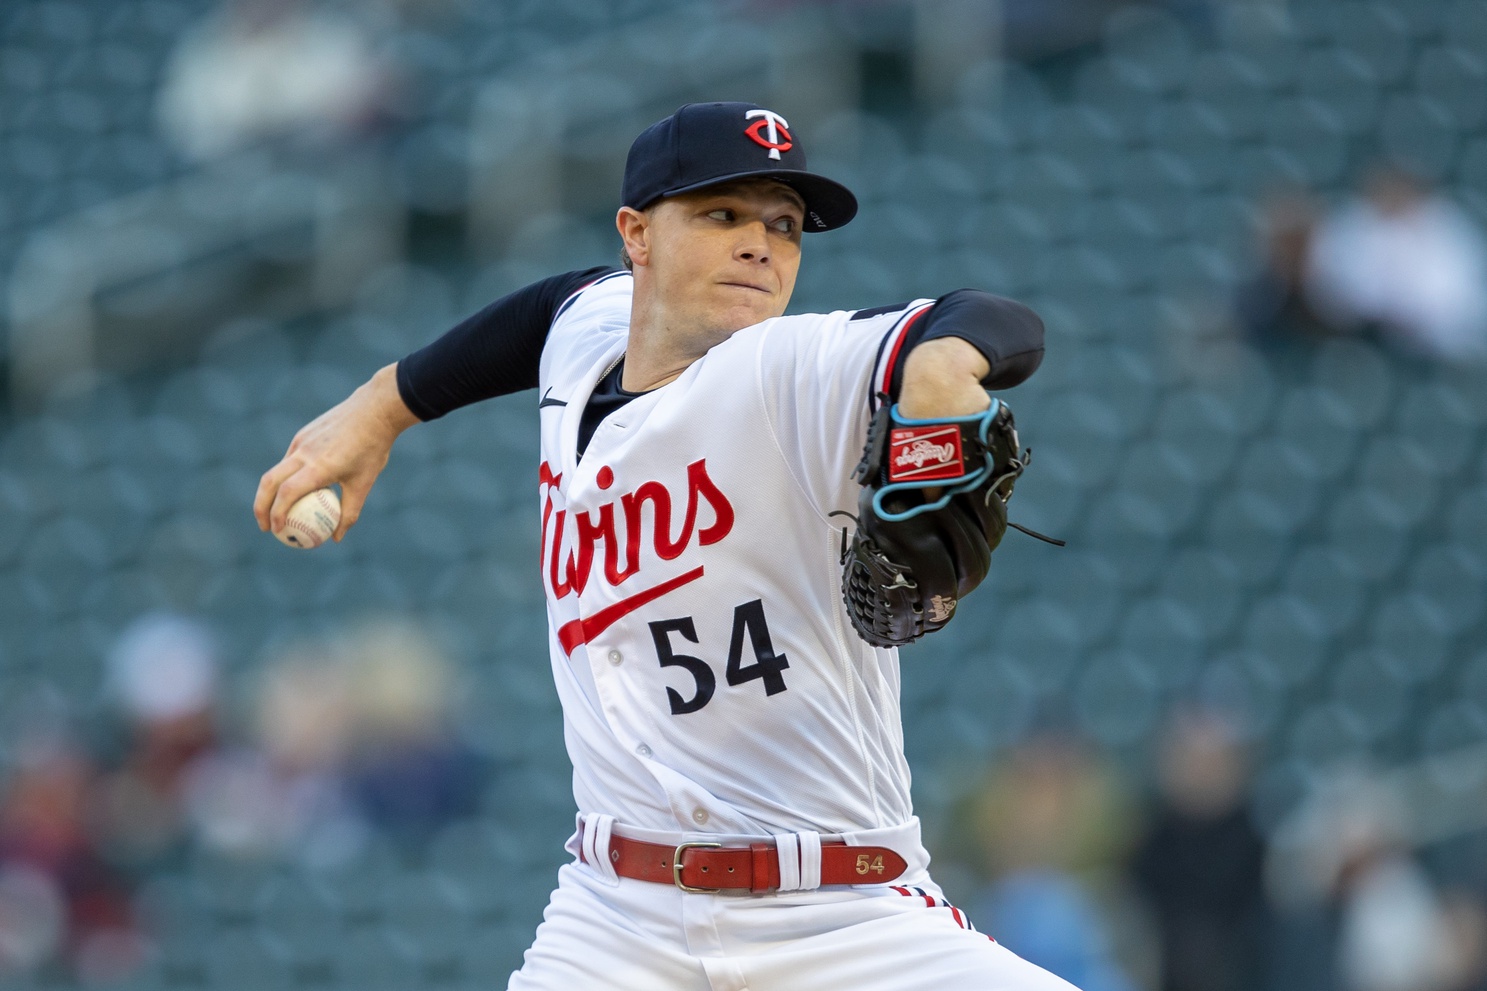 Something new for Sonny Gray and Twins: pitcher calling his own pitches